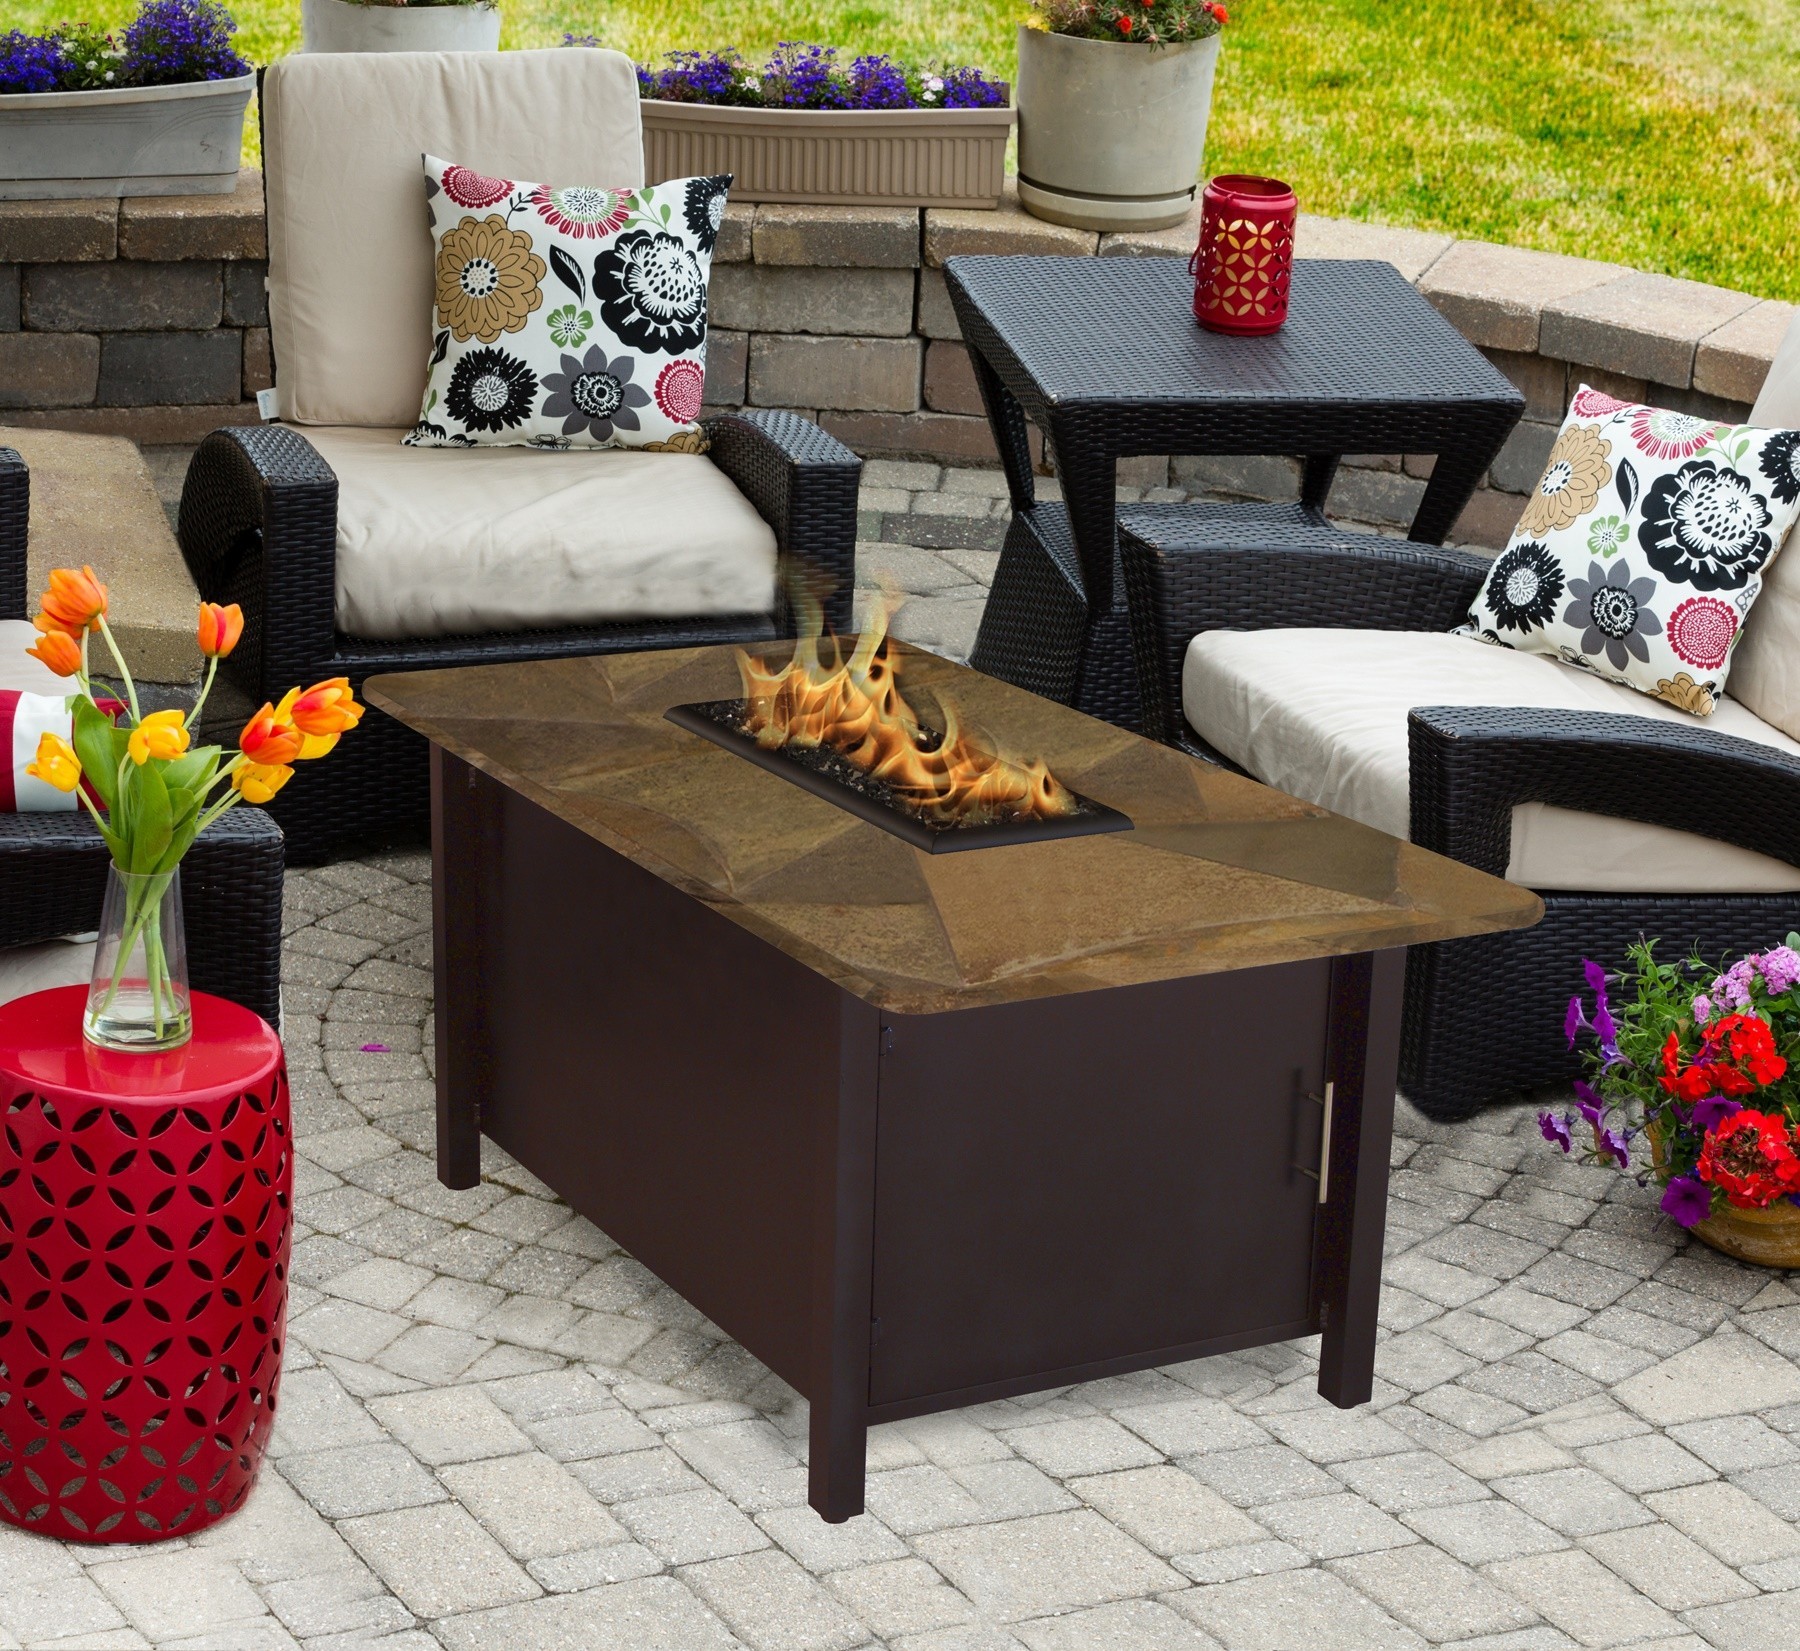 Safety Comes First With Fire Pits